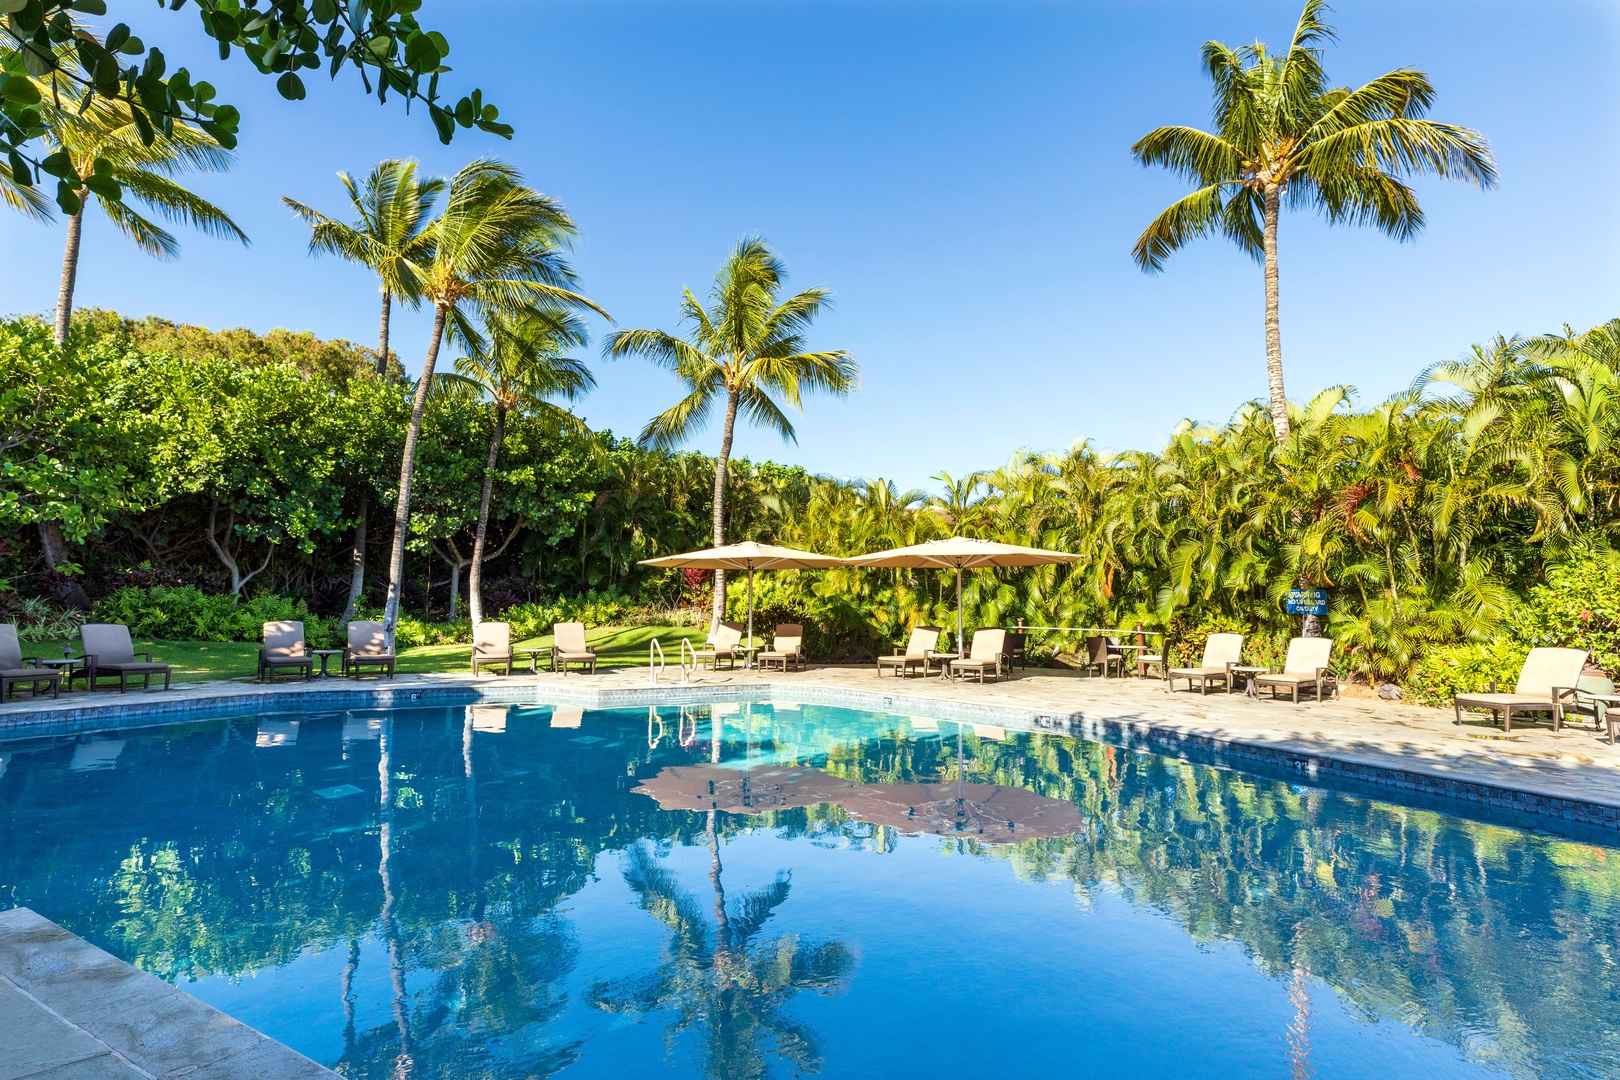 Kamuela Vacation Rentals, Mauna Lani Point E105 - Enjoy the tropical pool just steps away from your unit.